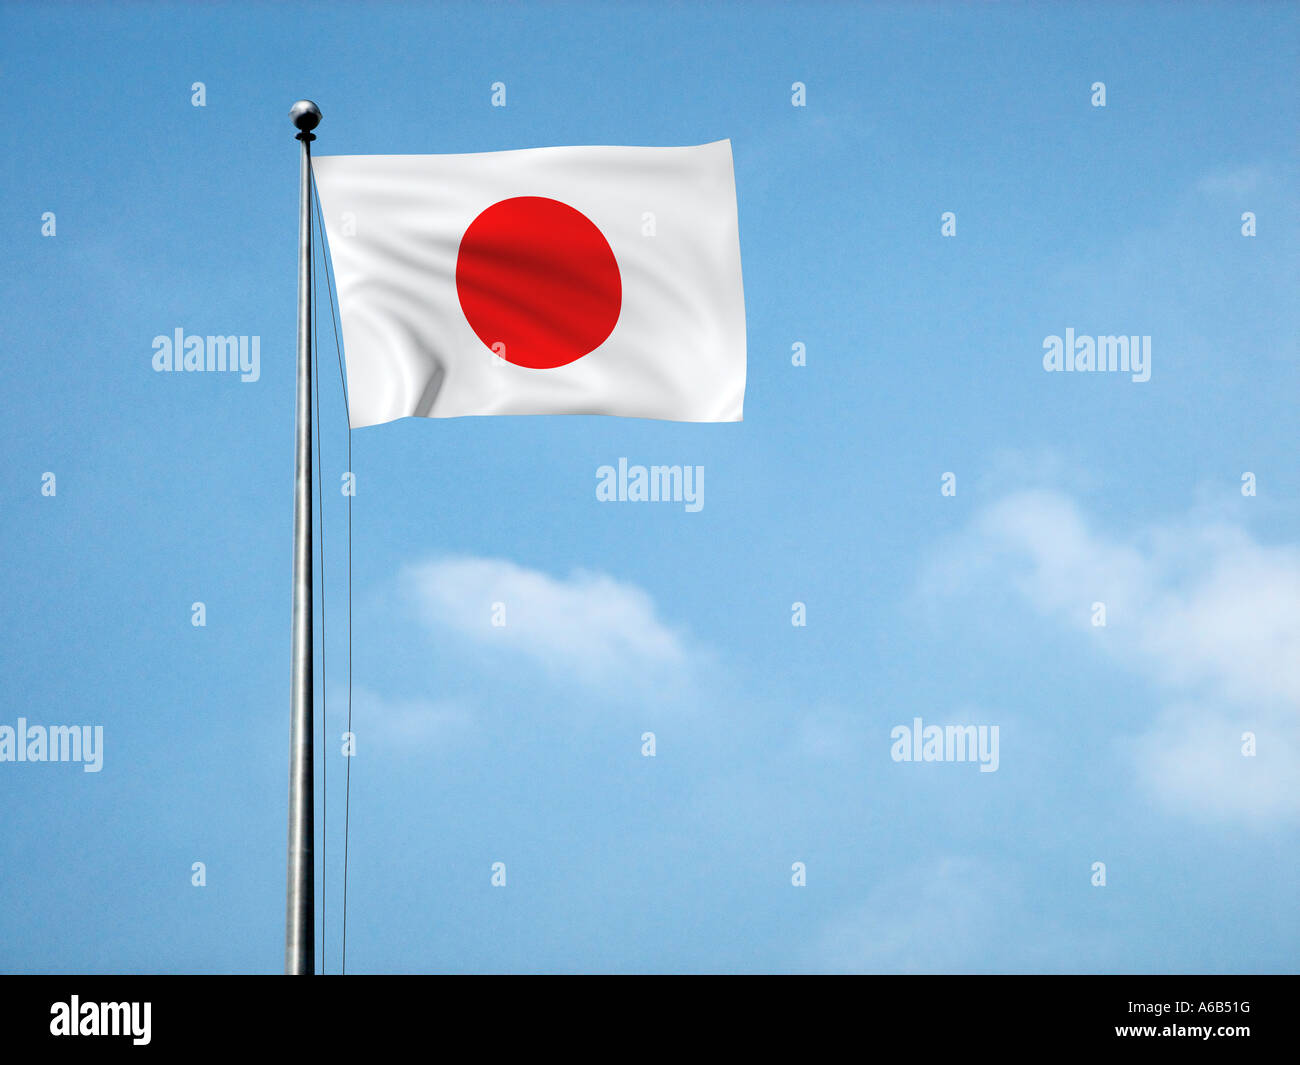 Japan flag of the nation country Japan japanese flag Nippon Stock Photo